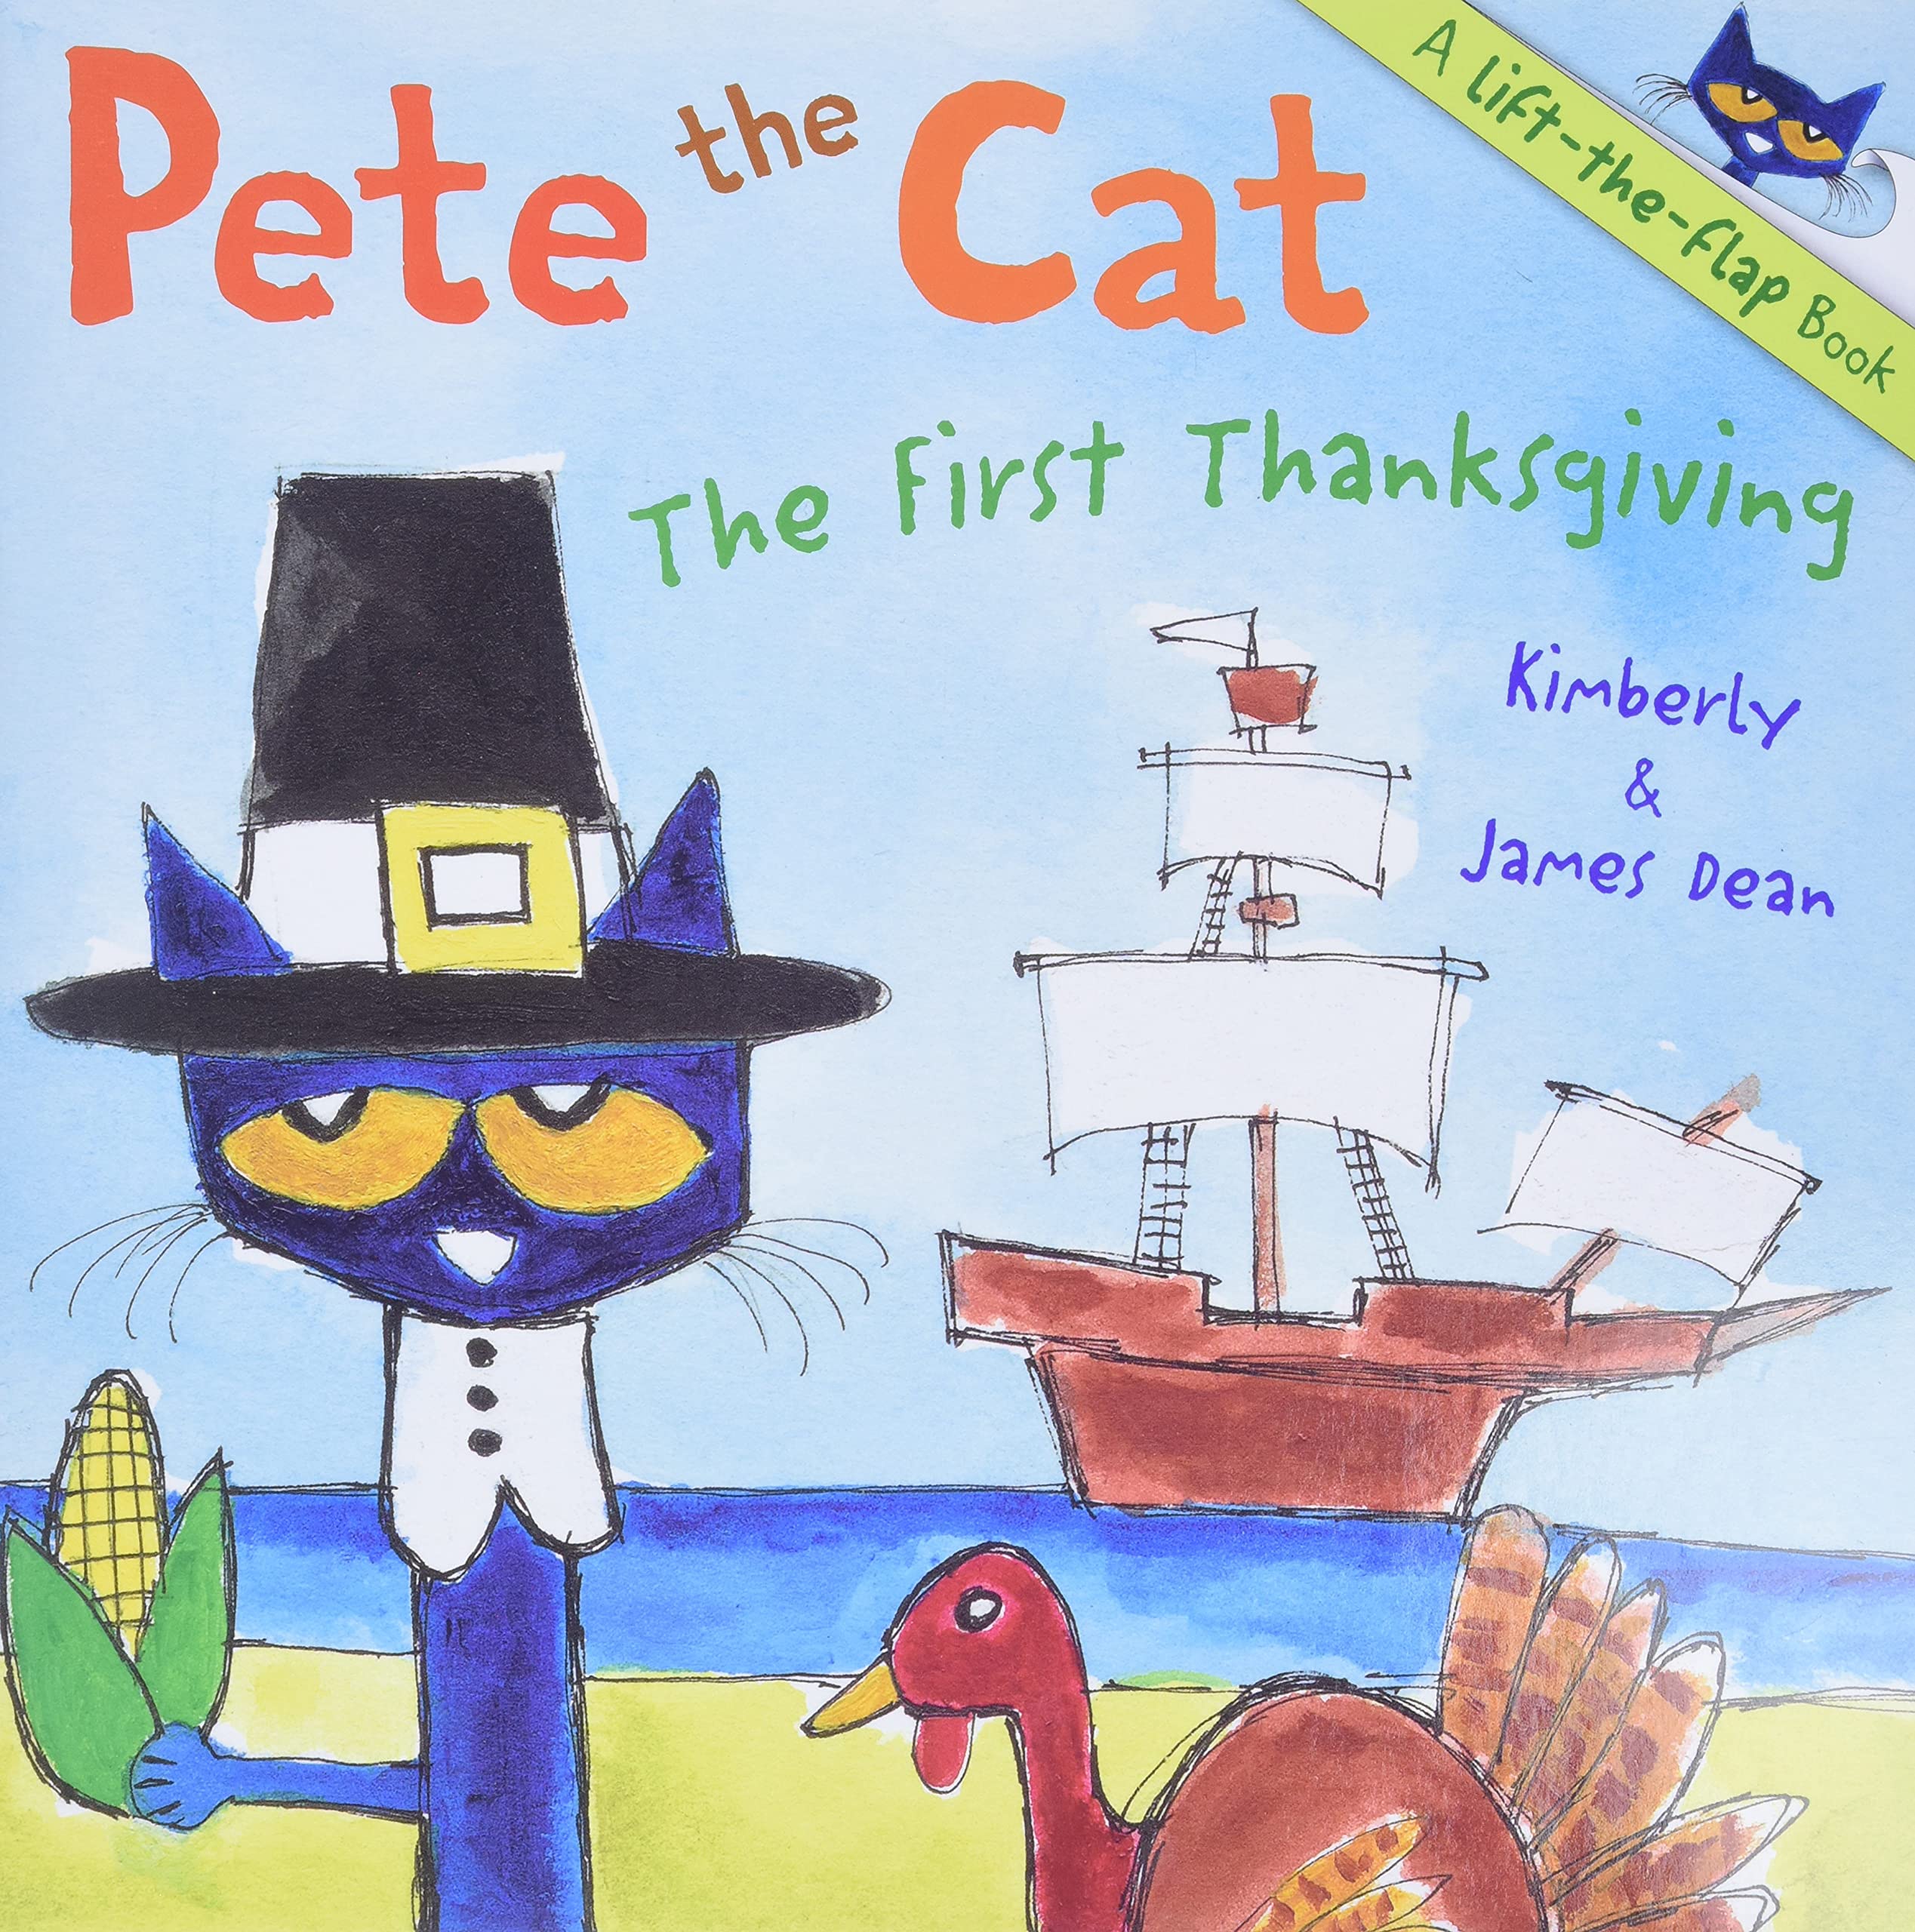 speech and language teaching concepts for Pete The Cat The First Thanksgiving in speech therapy​ ​